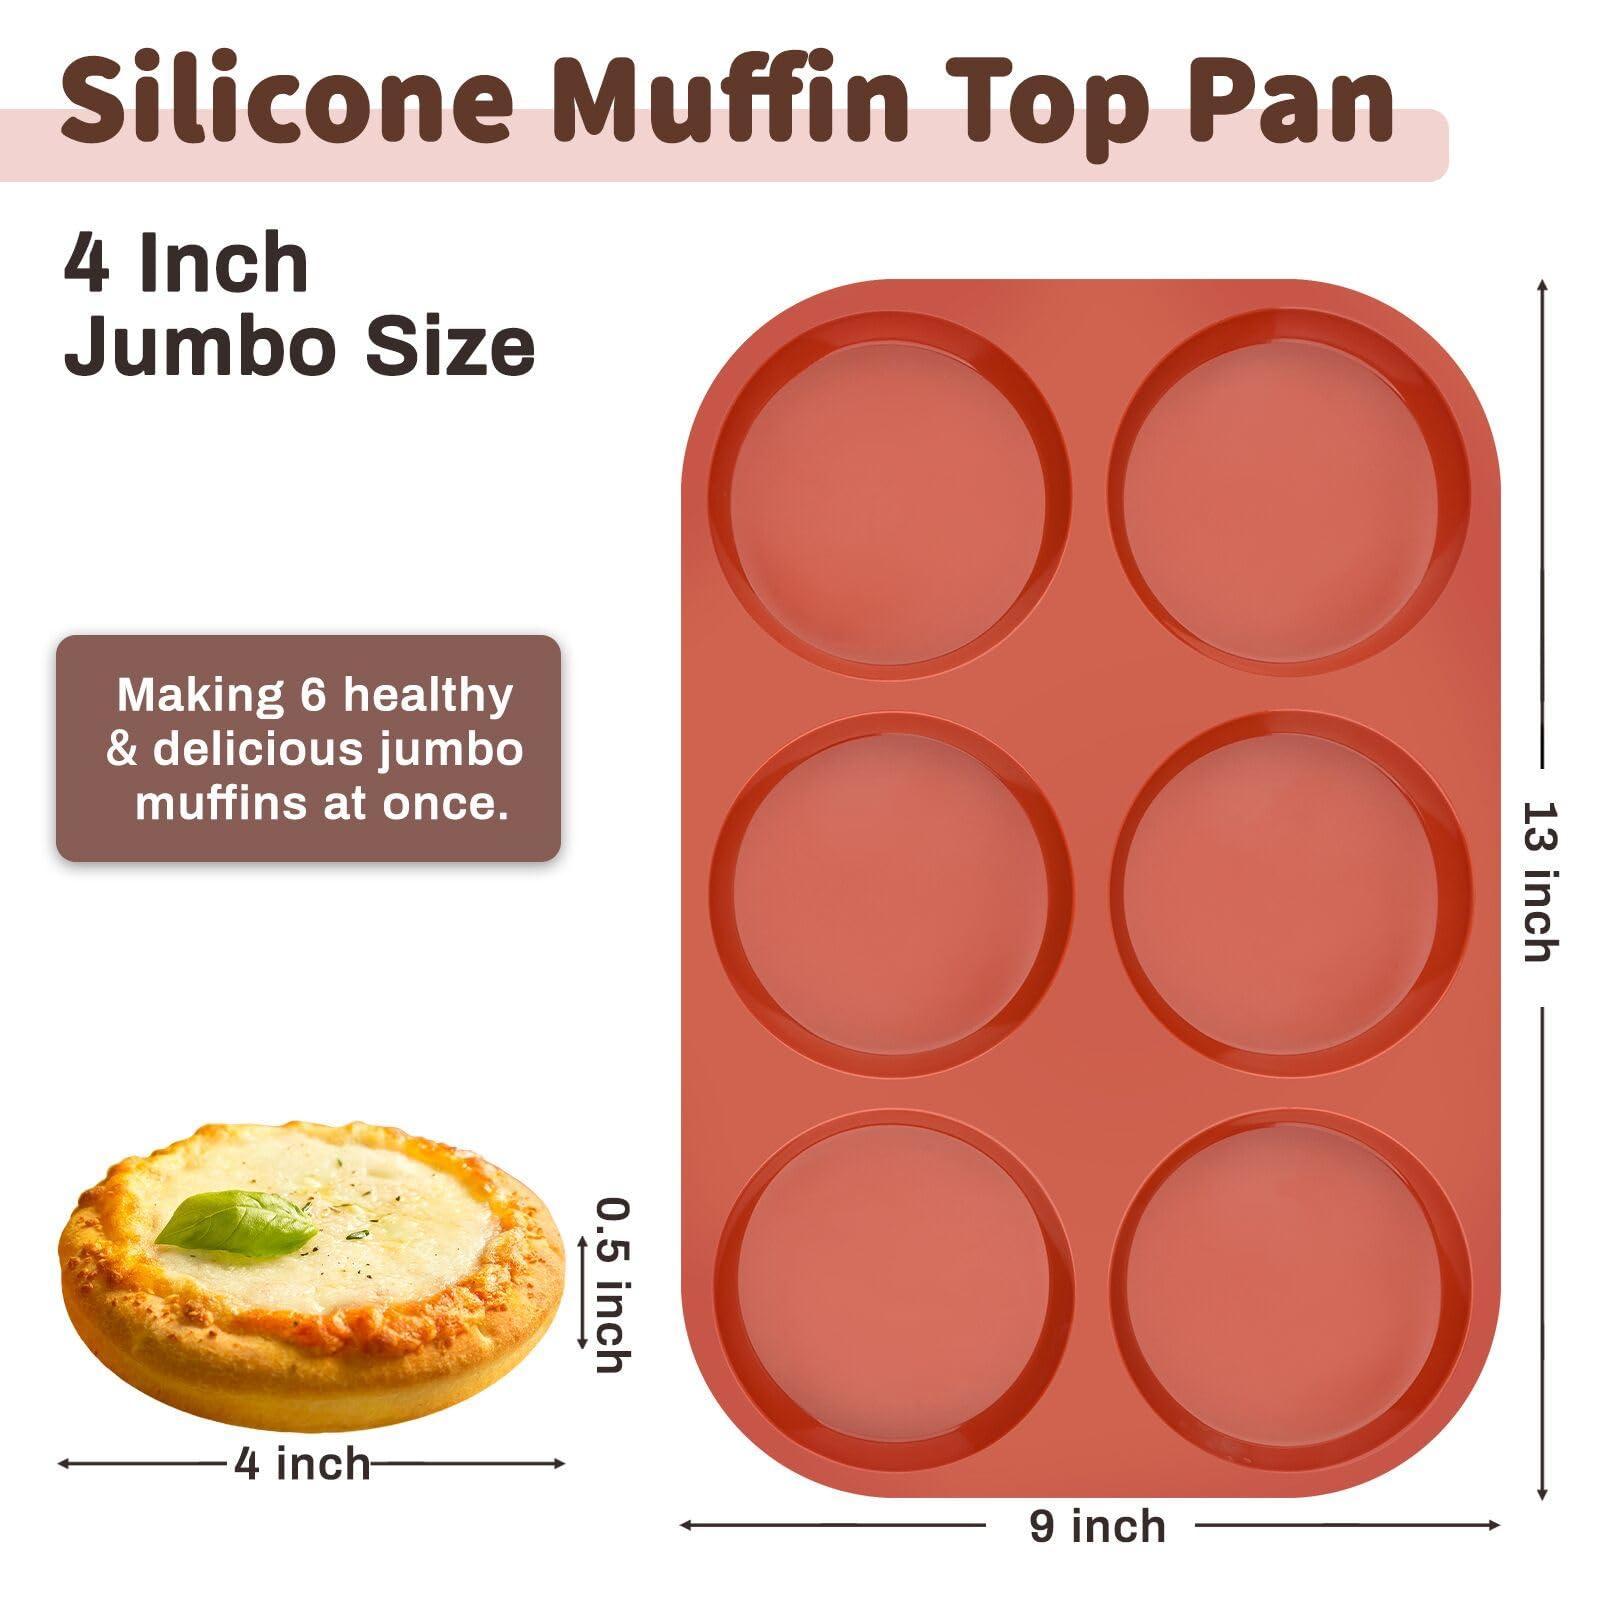 JOERSH 2-PK Silicone Egg Molds Non-Stick 4" Jumbo Size Round Muffin Top Baking Pans Egg Molds for Breakfast Egg Sandwiches, Corn Bread & English Muffins - CookCave